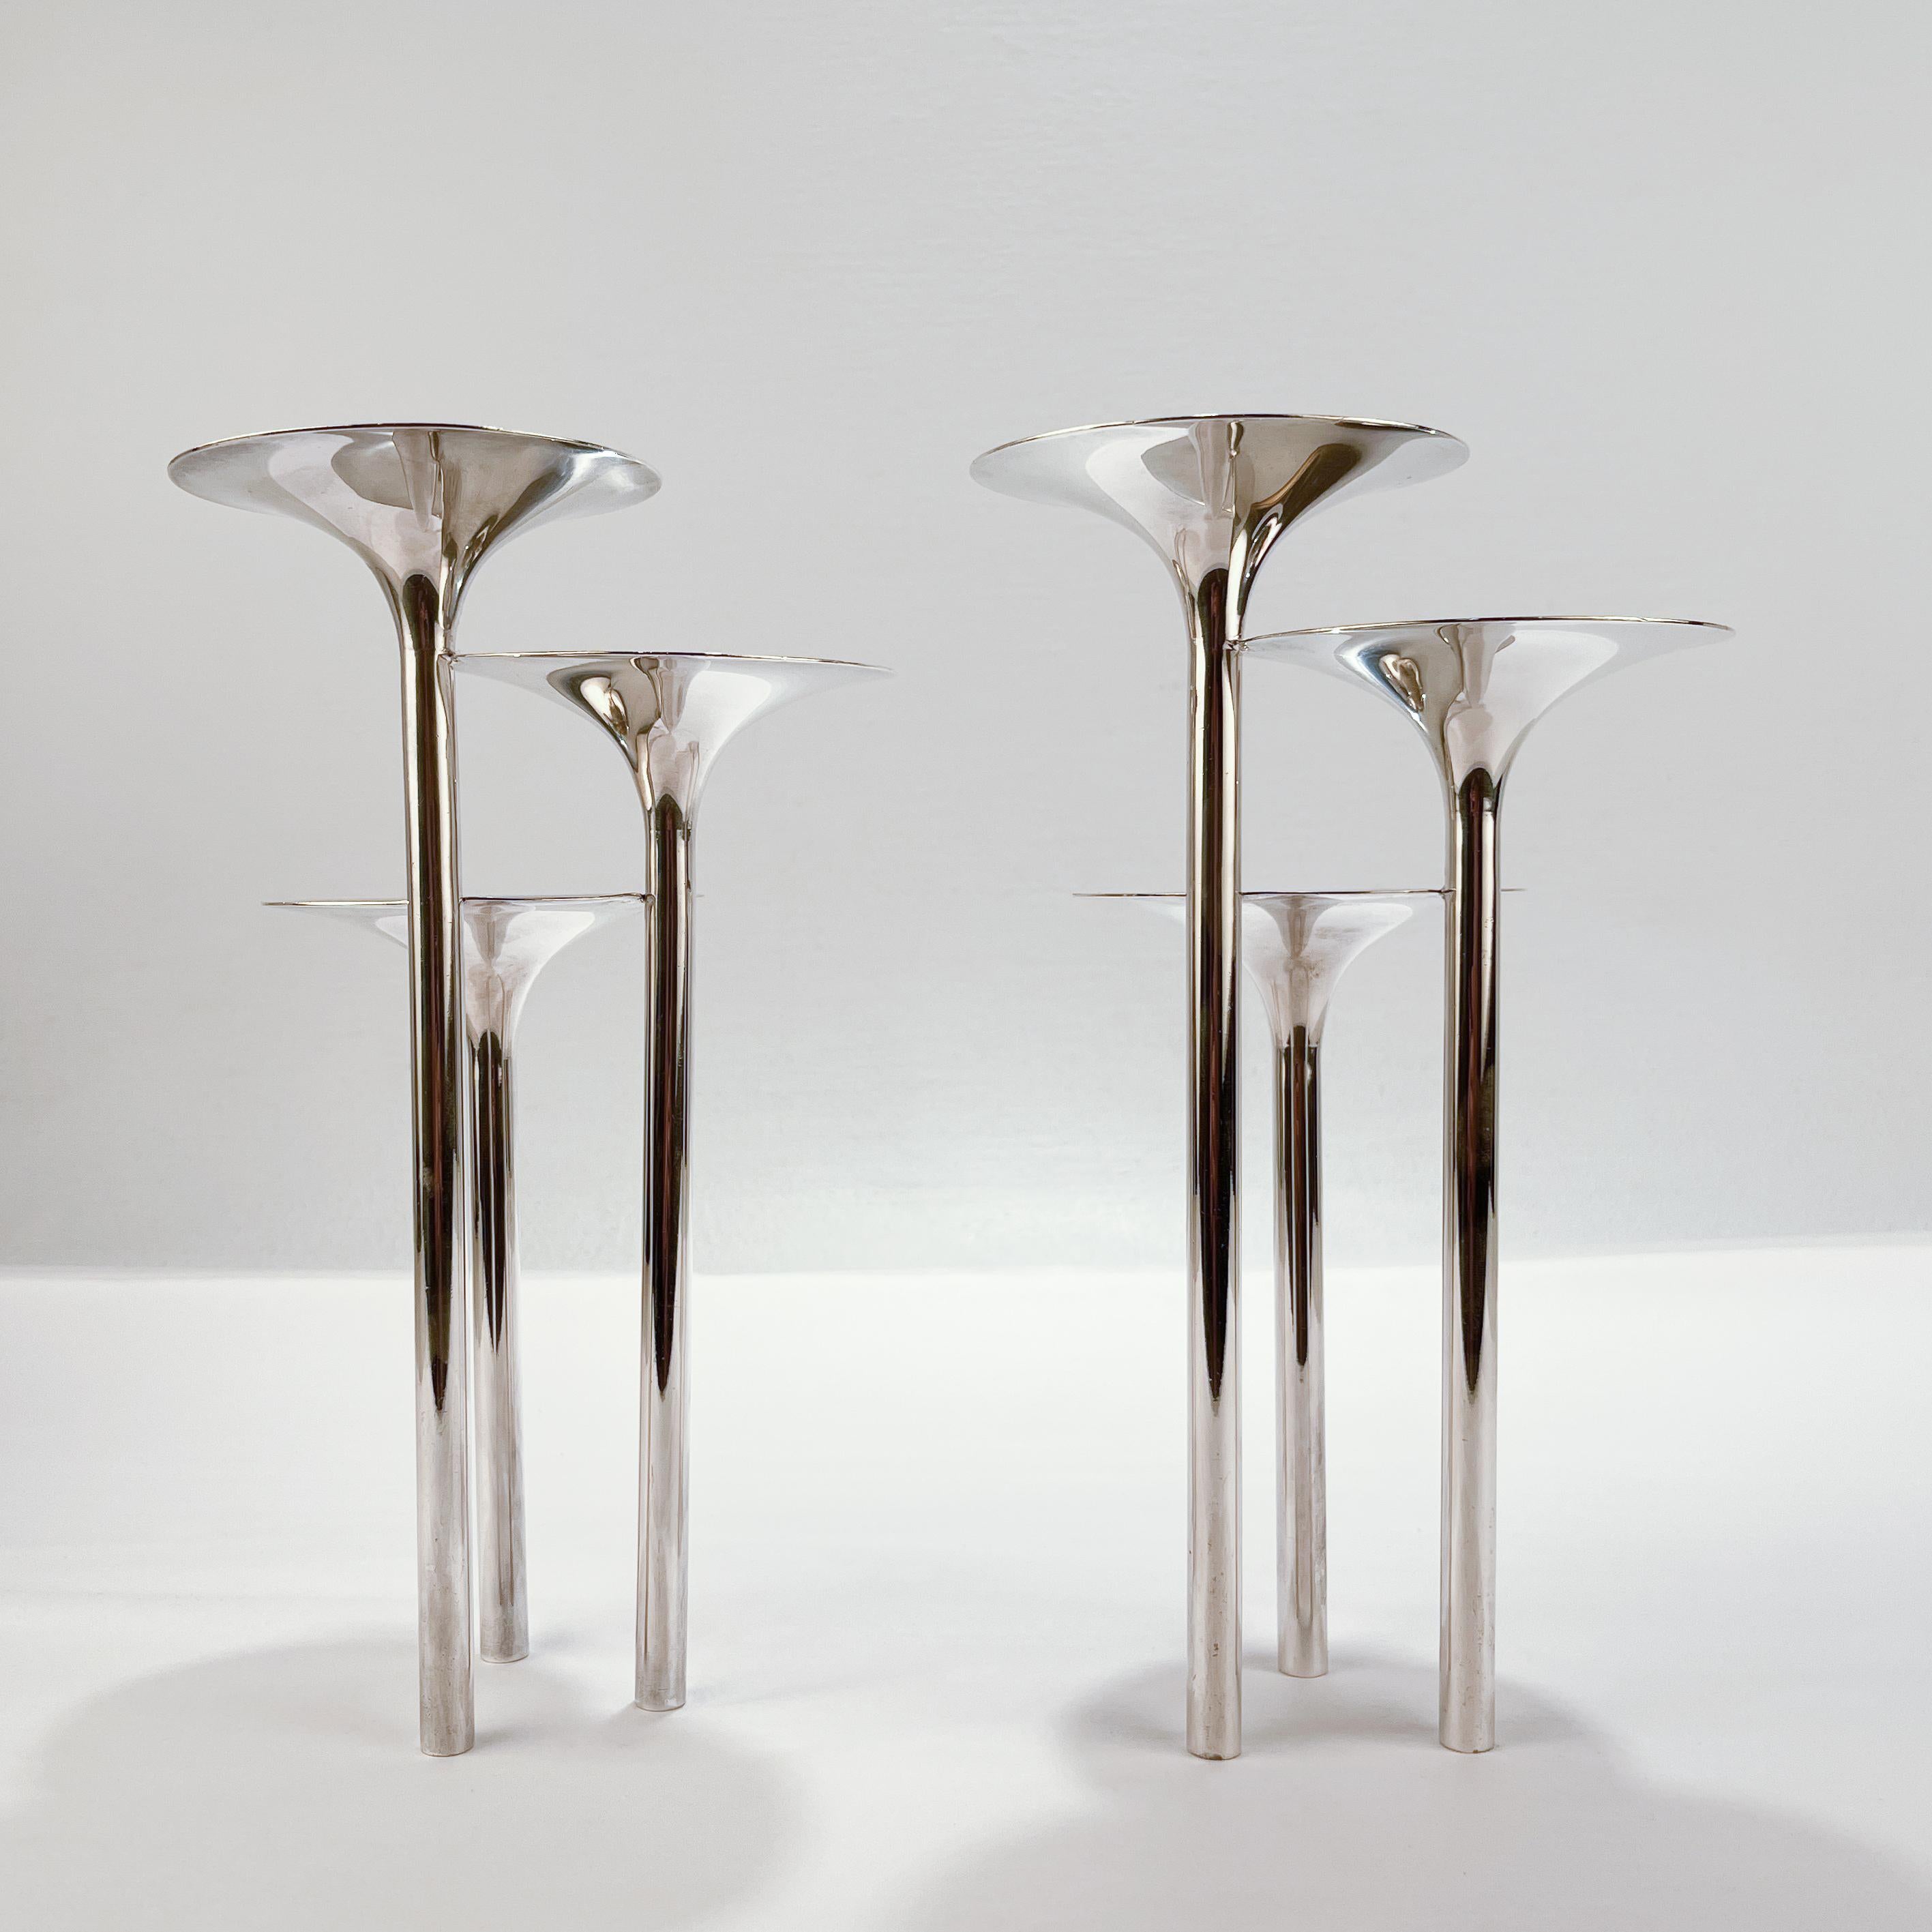 A fine pair of Modernist Christofle candle holders.

Entitled 'Concerto di Trombe'.

Designed by Lino Sabattini for the Gallia division of Christofle in 1959.

Each modeled as 3 trumpet form vessels joined at their stems.

(Because they are